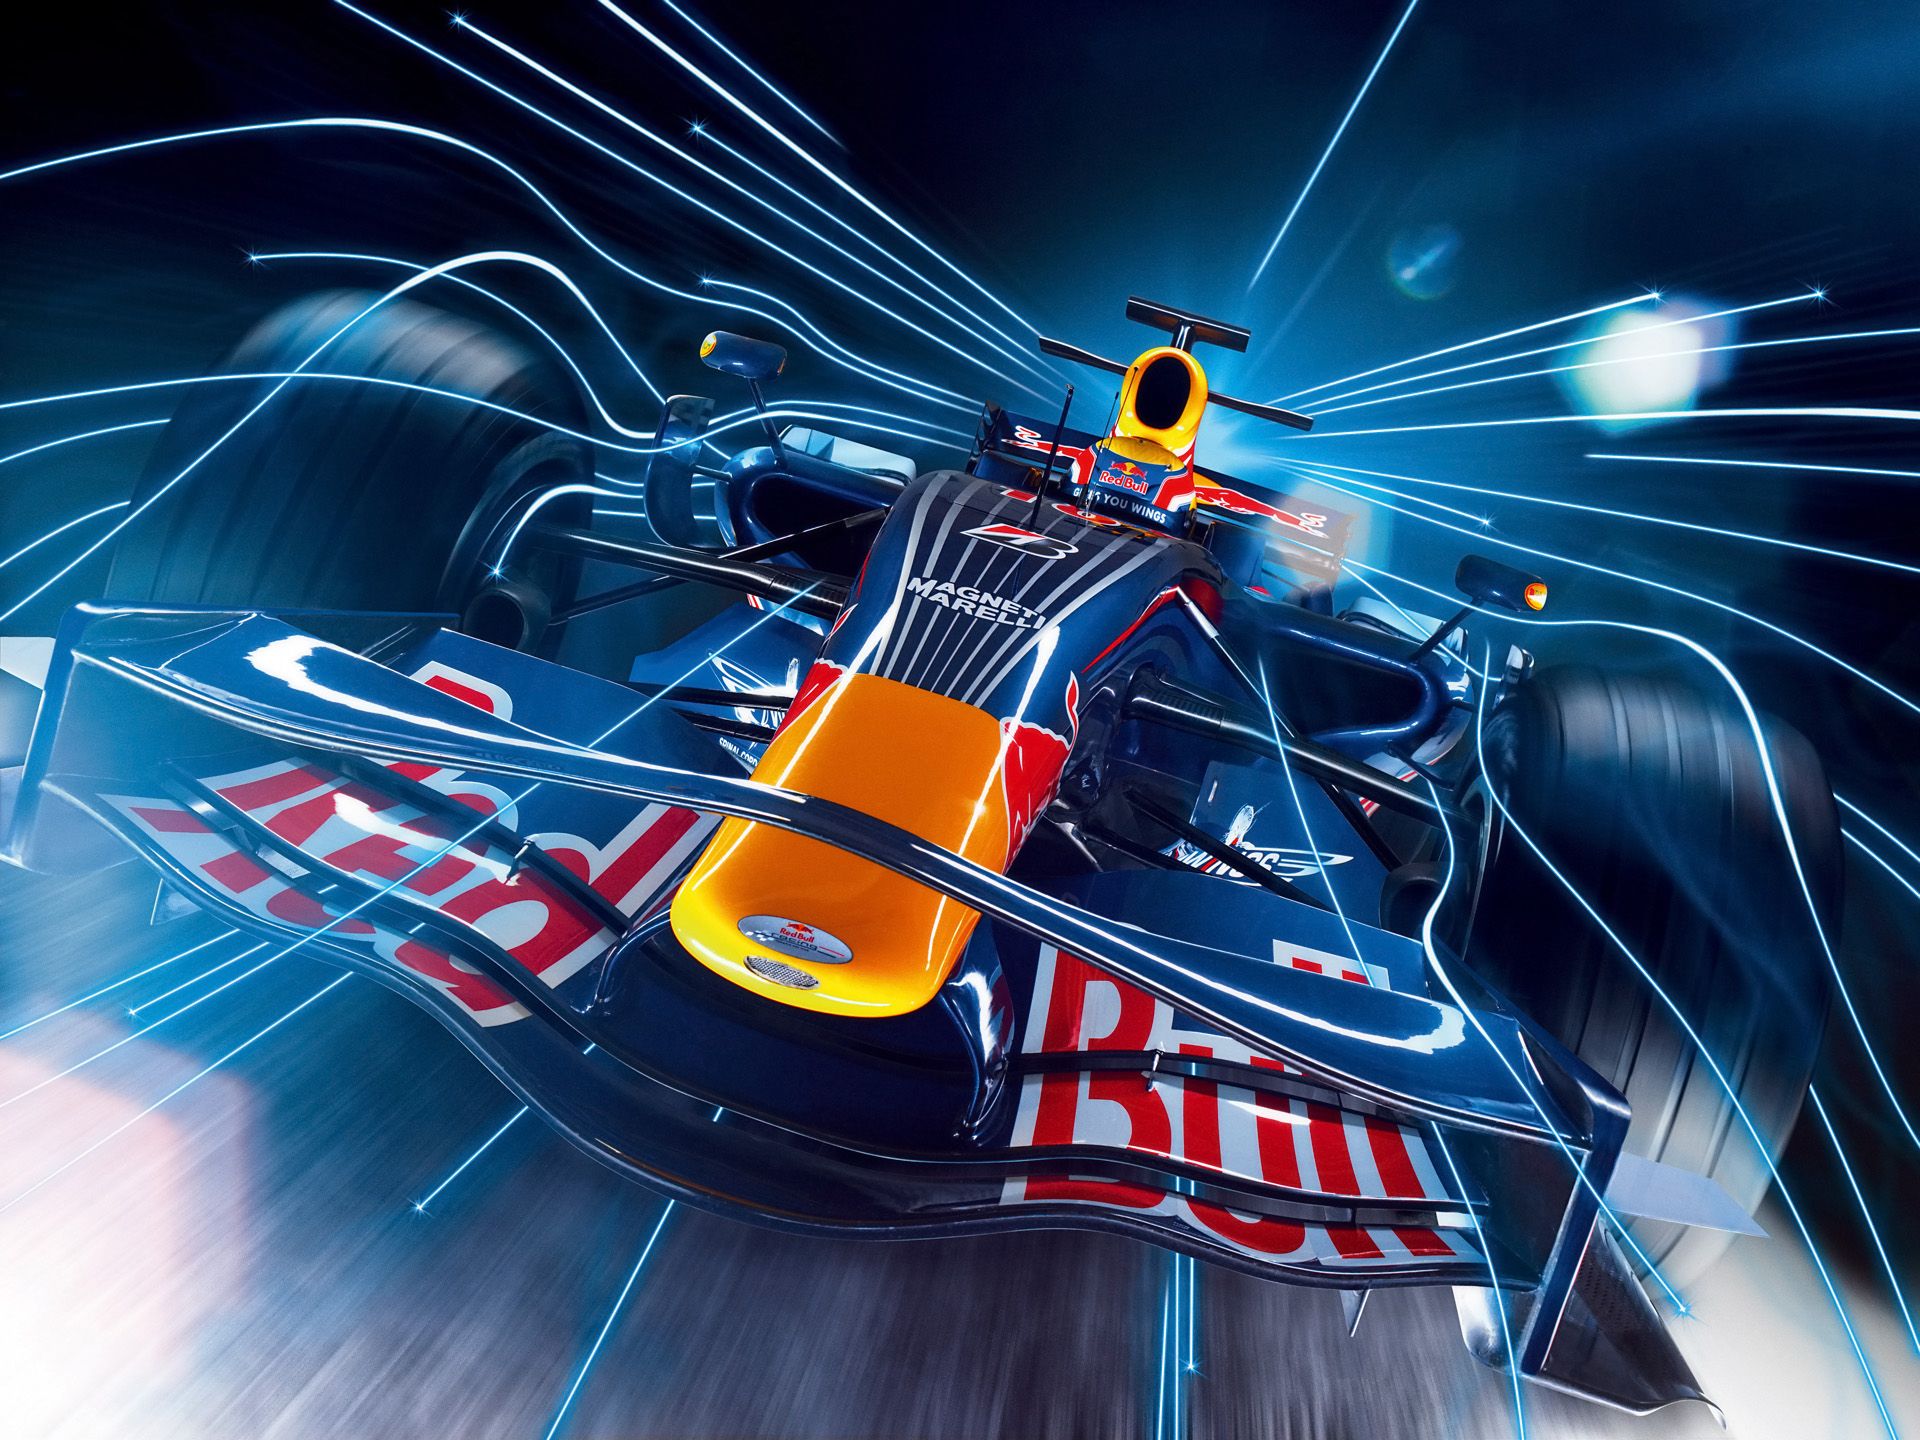 Red Bull's new augmented reality racing app also boosts sales